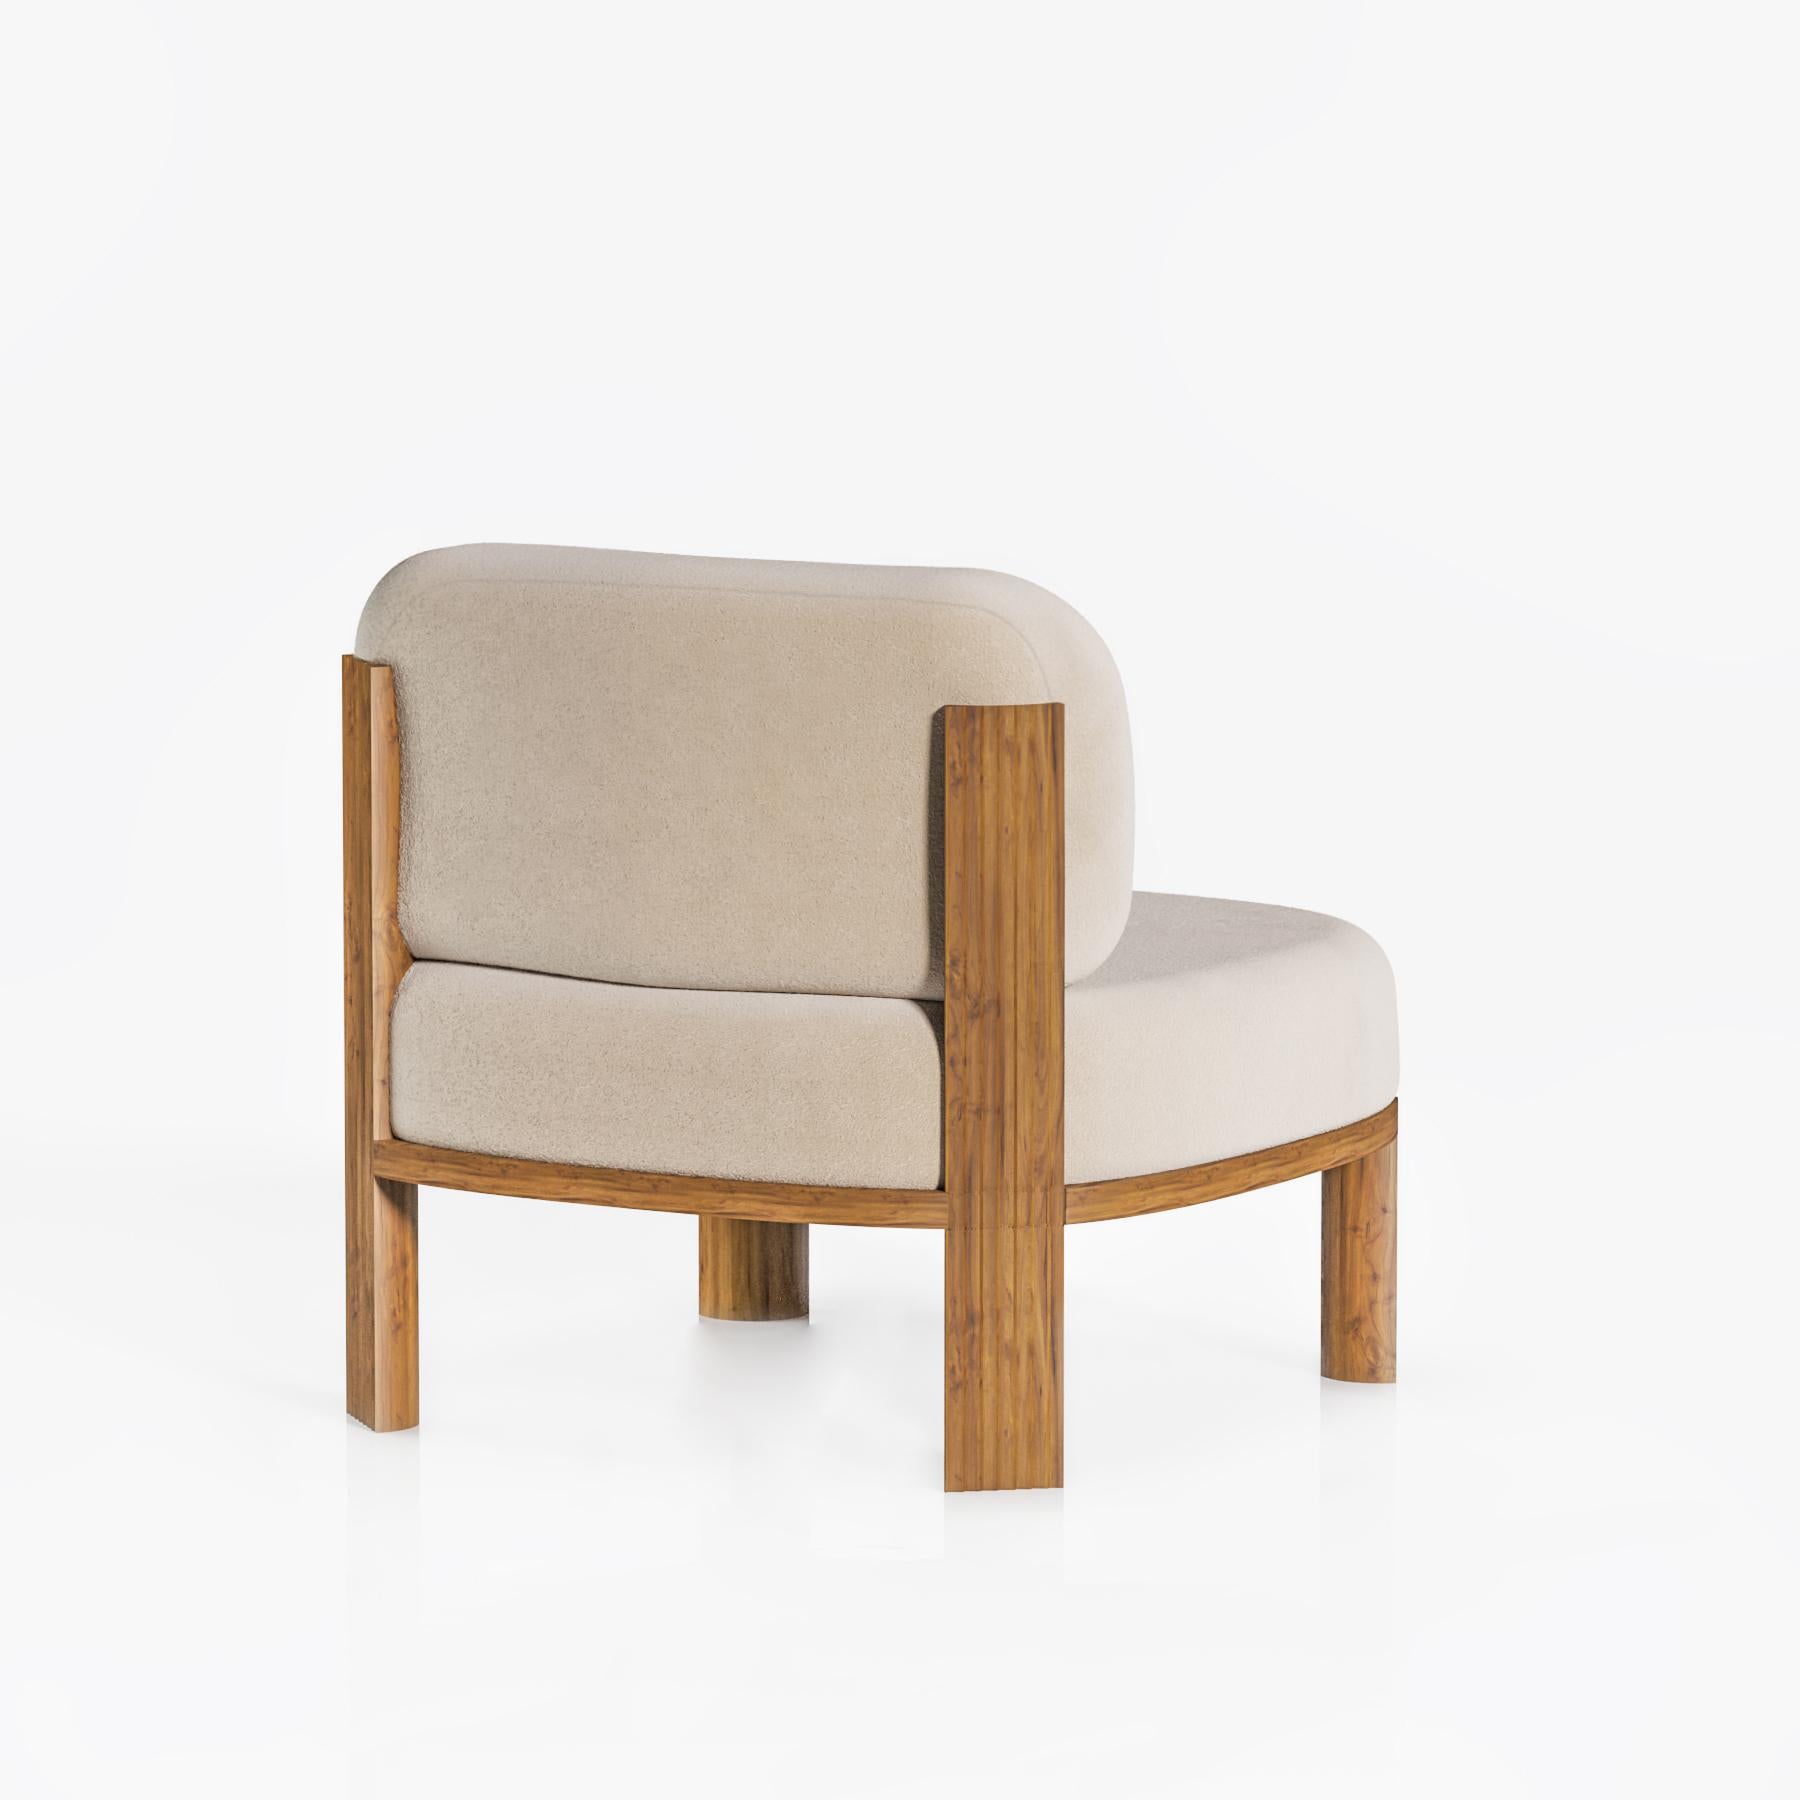 111  Armchair with Light Brown Wooden Oak & Cream Fabric by Federico Peri for Collector Studio: it represents all the lines incesed in the surface of the solid wood.


DIMENSIONS
W 75 cm  30″
D 70 cm  28″
H 77 cm  30″
SH 42 cm  17″

PRODUCT